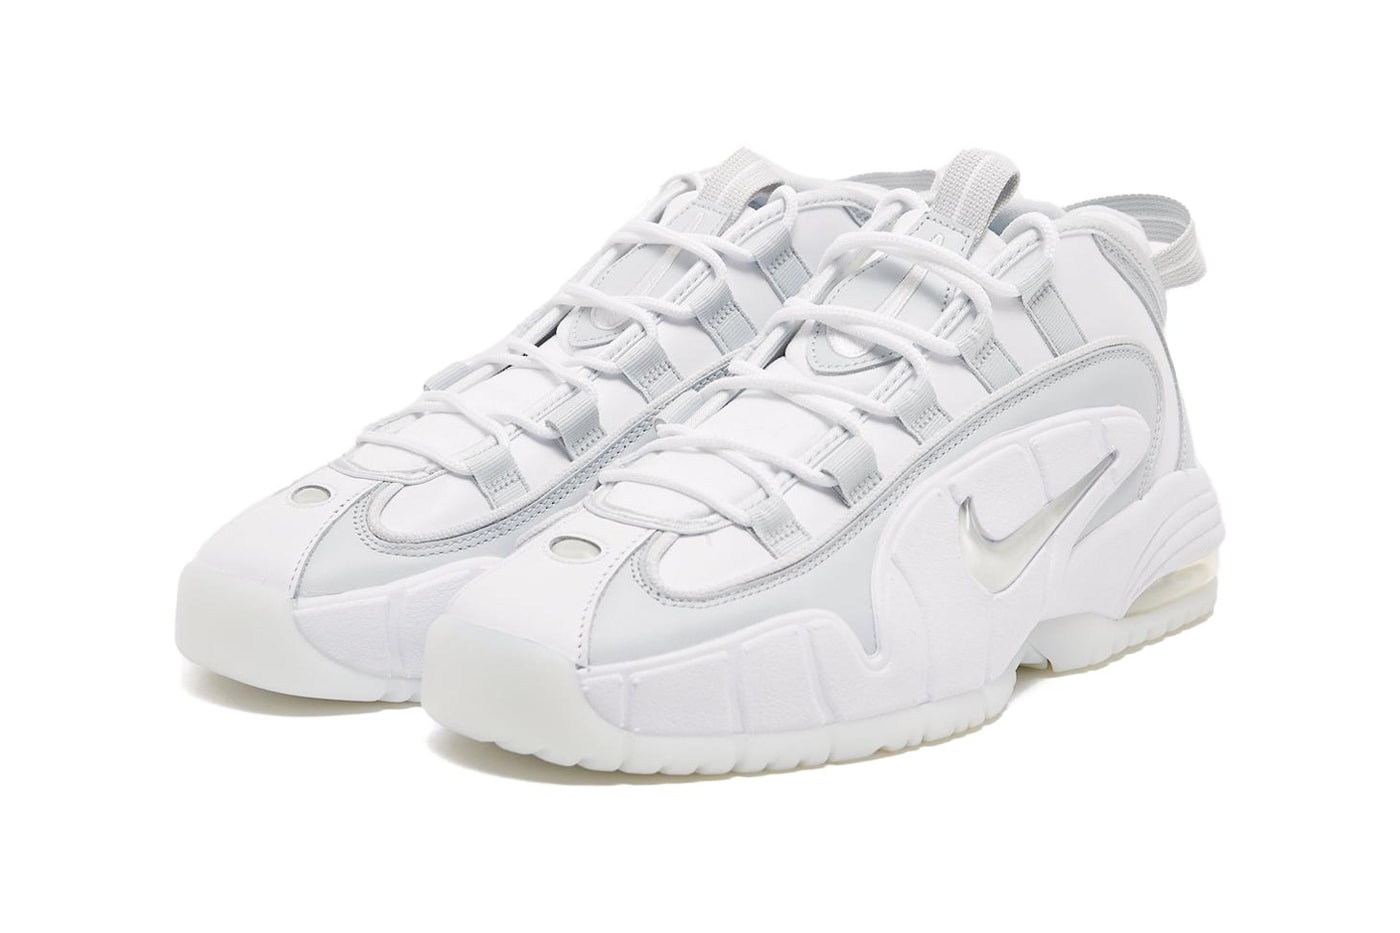 Nike Air Max Penny 1 Arrives in 